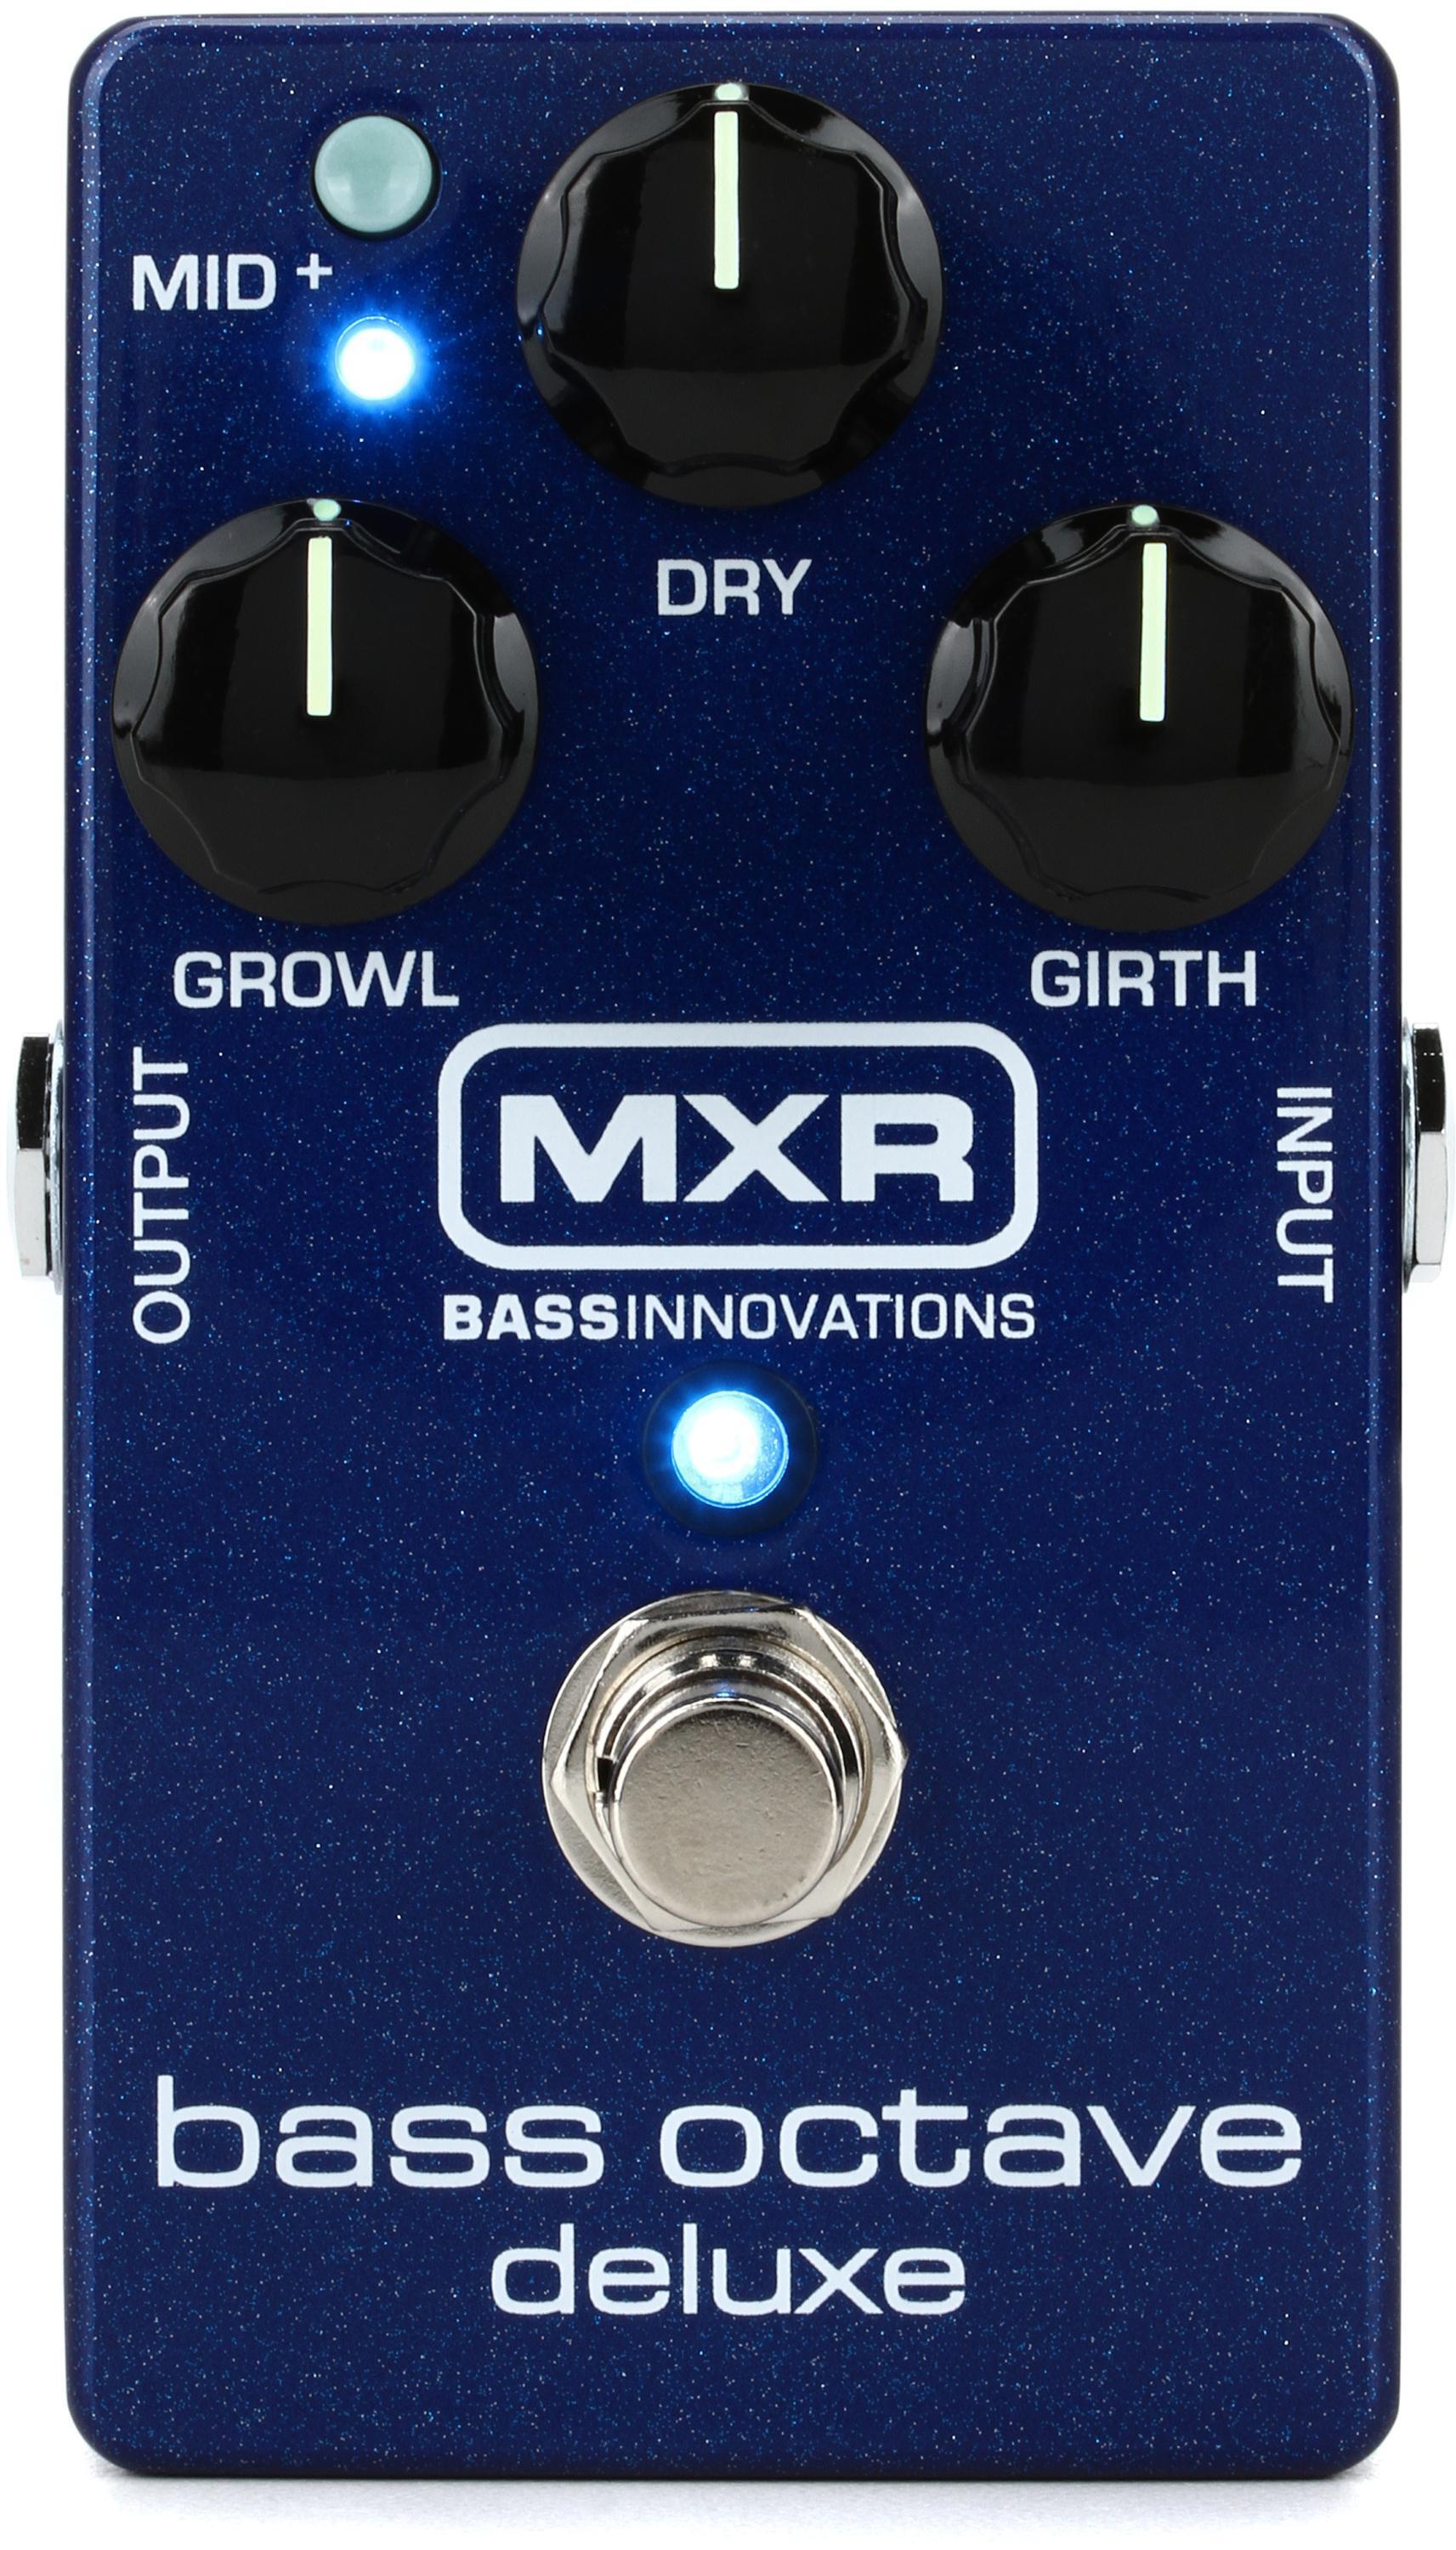 MXR M288 Bass Octave Deluxe Pedal | Sweetwater